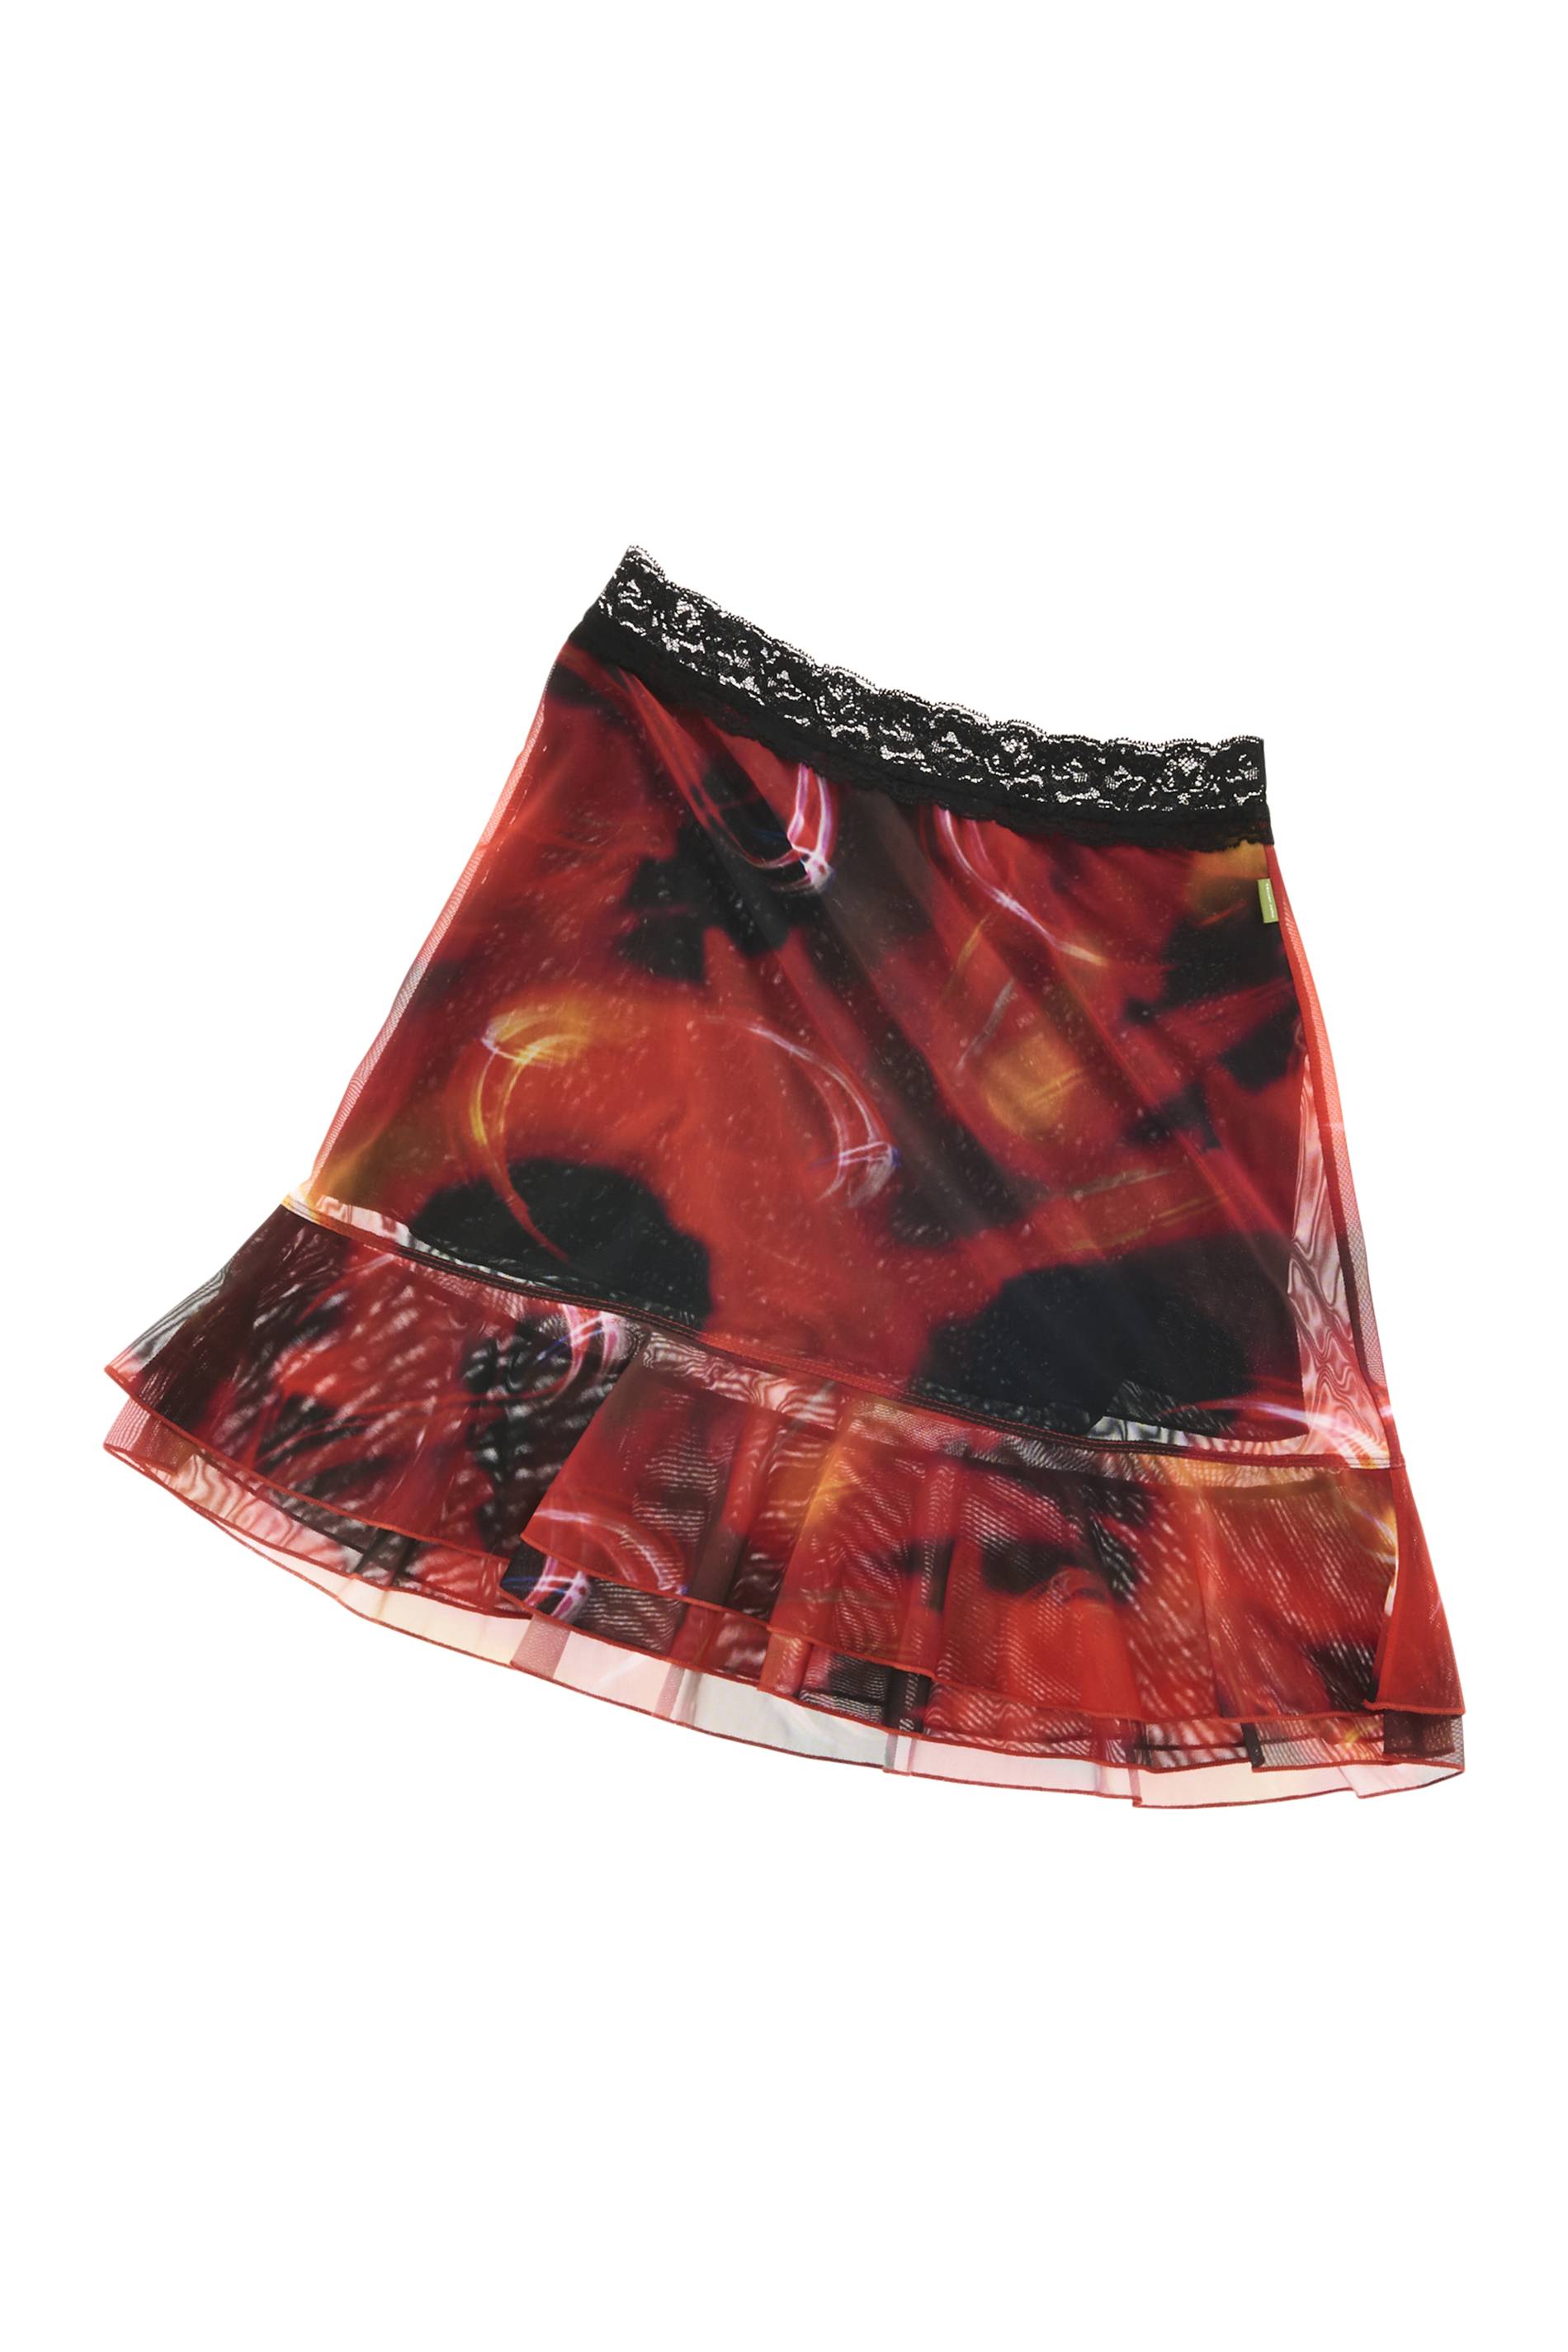 Marc Jacobs Heaven or Las Vegas collection; skirt